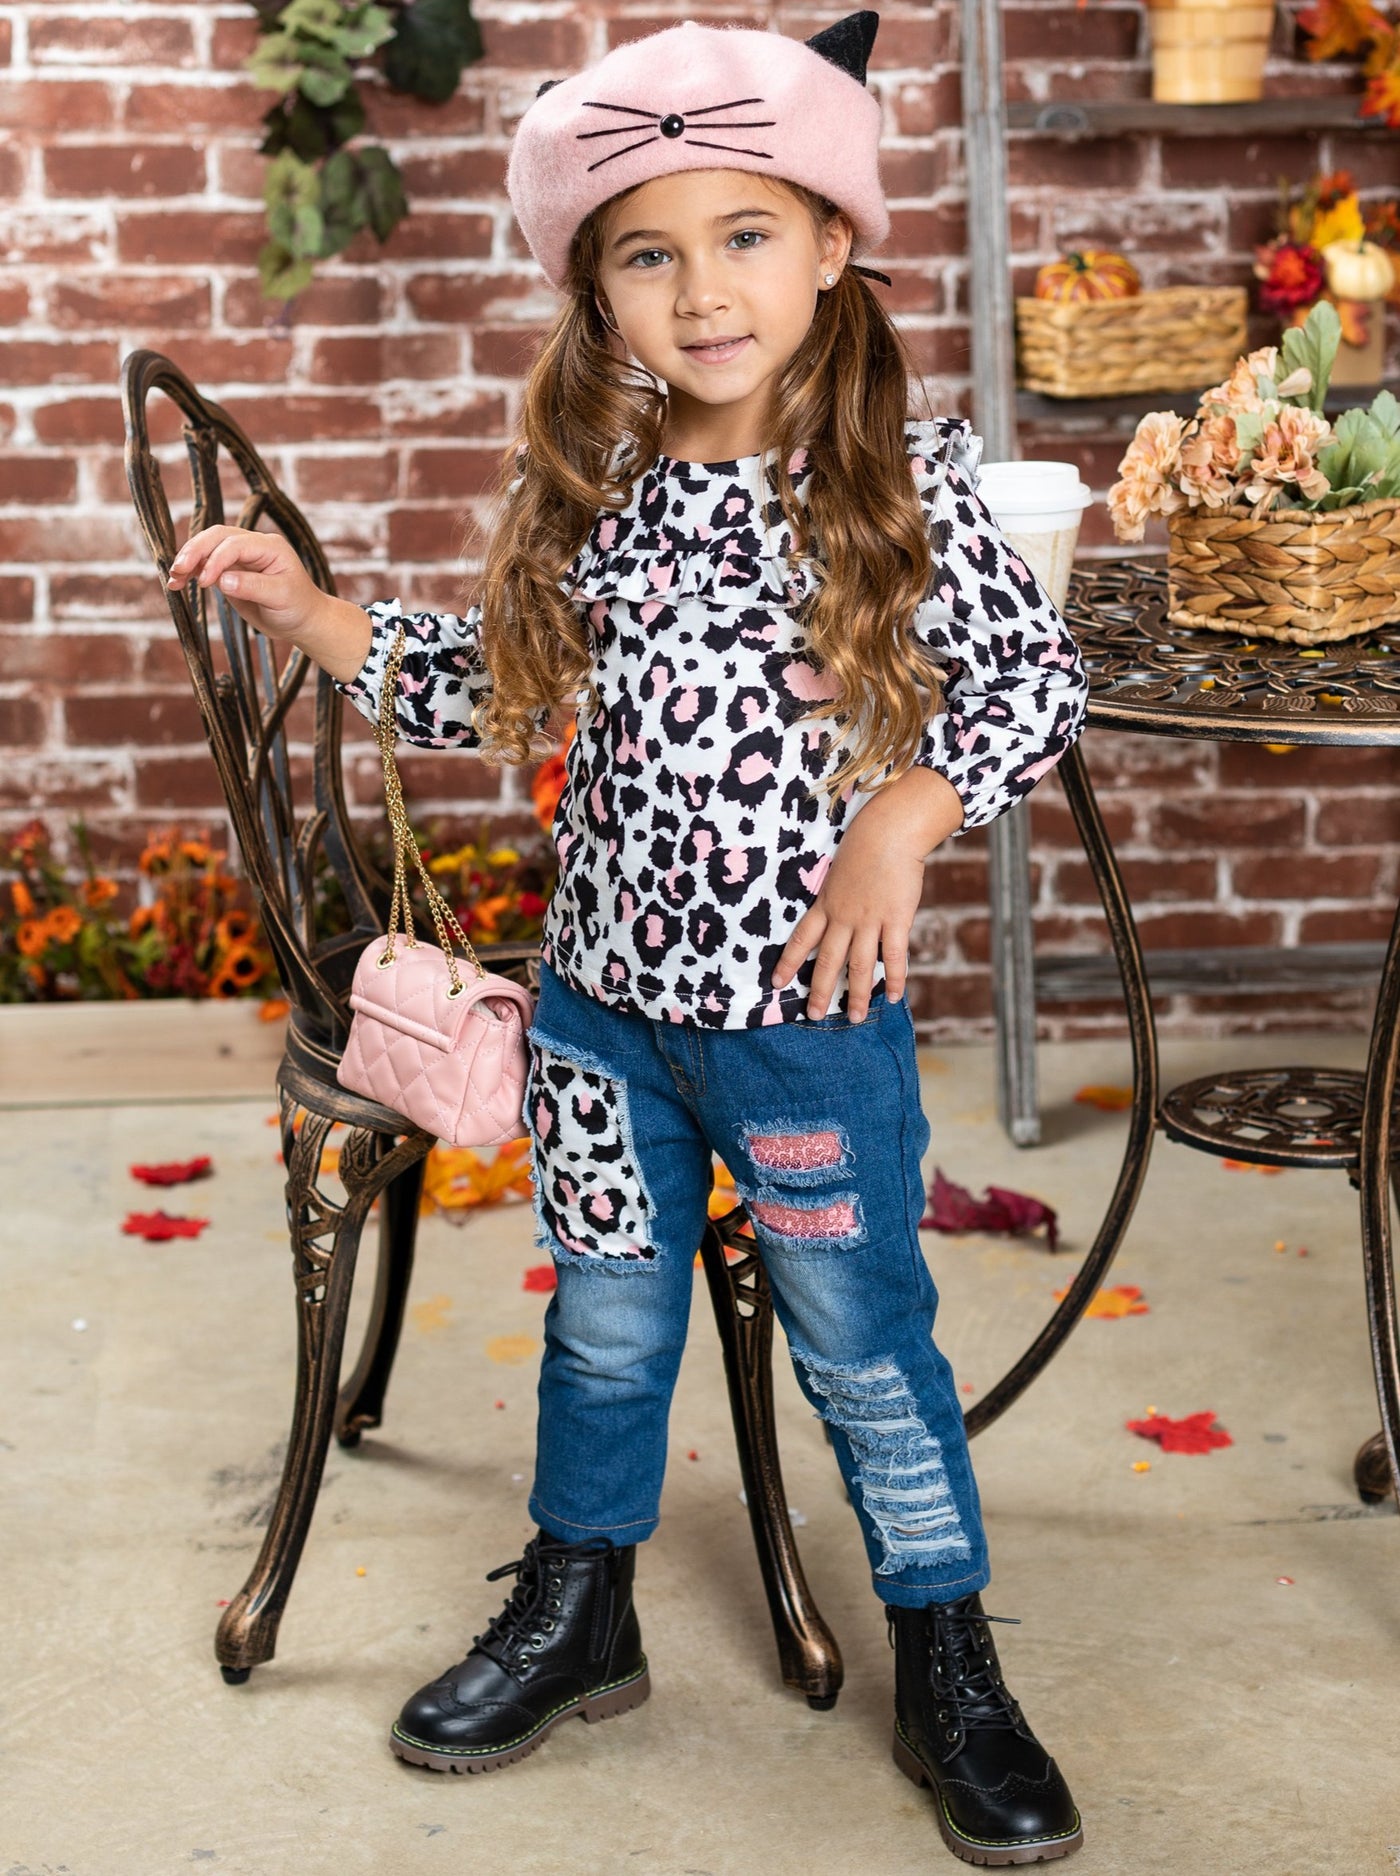 Girls set features a ruffled long-sleeved top with cow print and patched, distressed jeans with sash